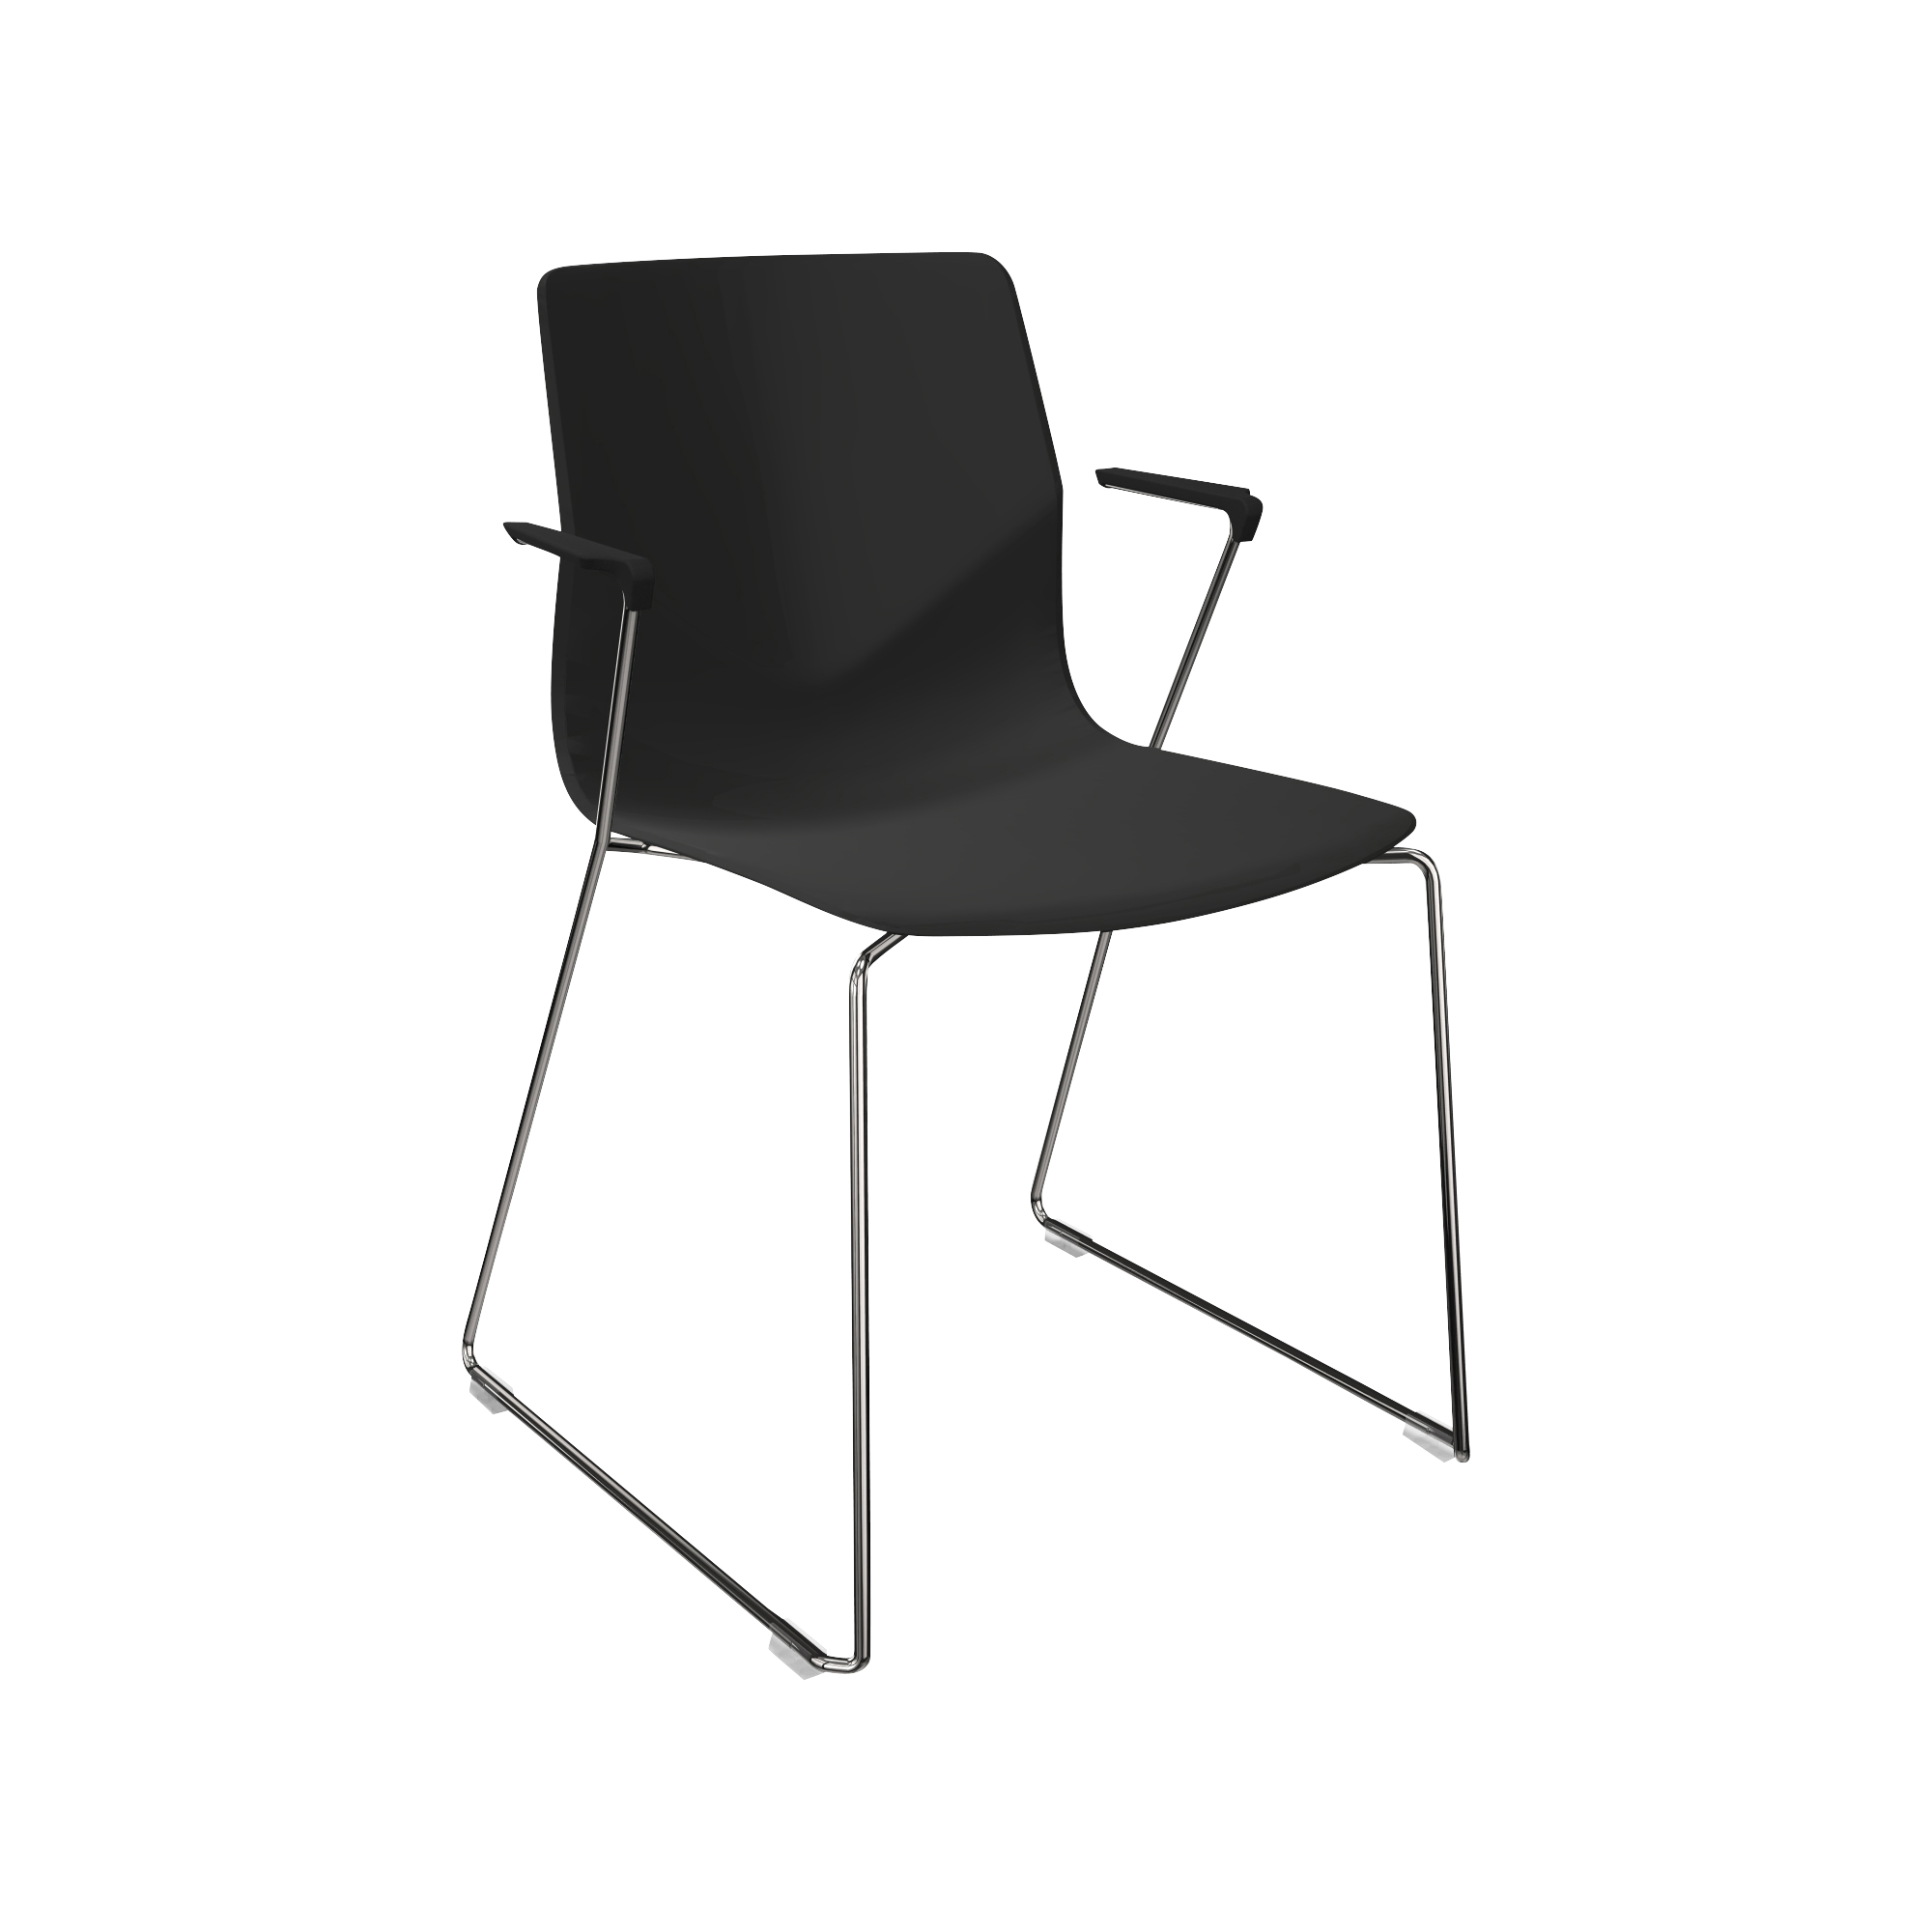 A black plastic chair with a metal frame.